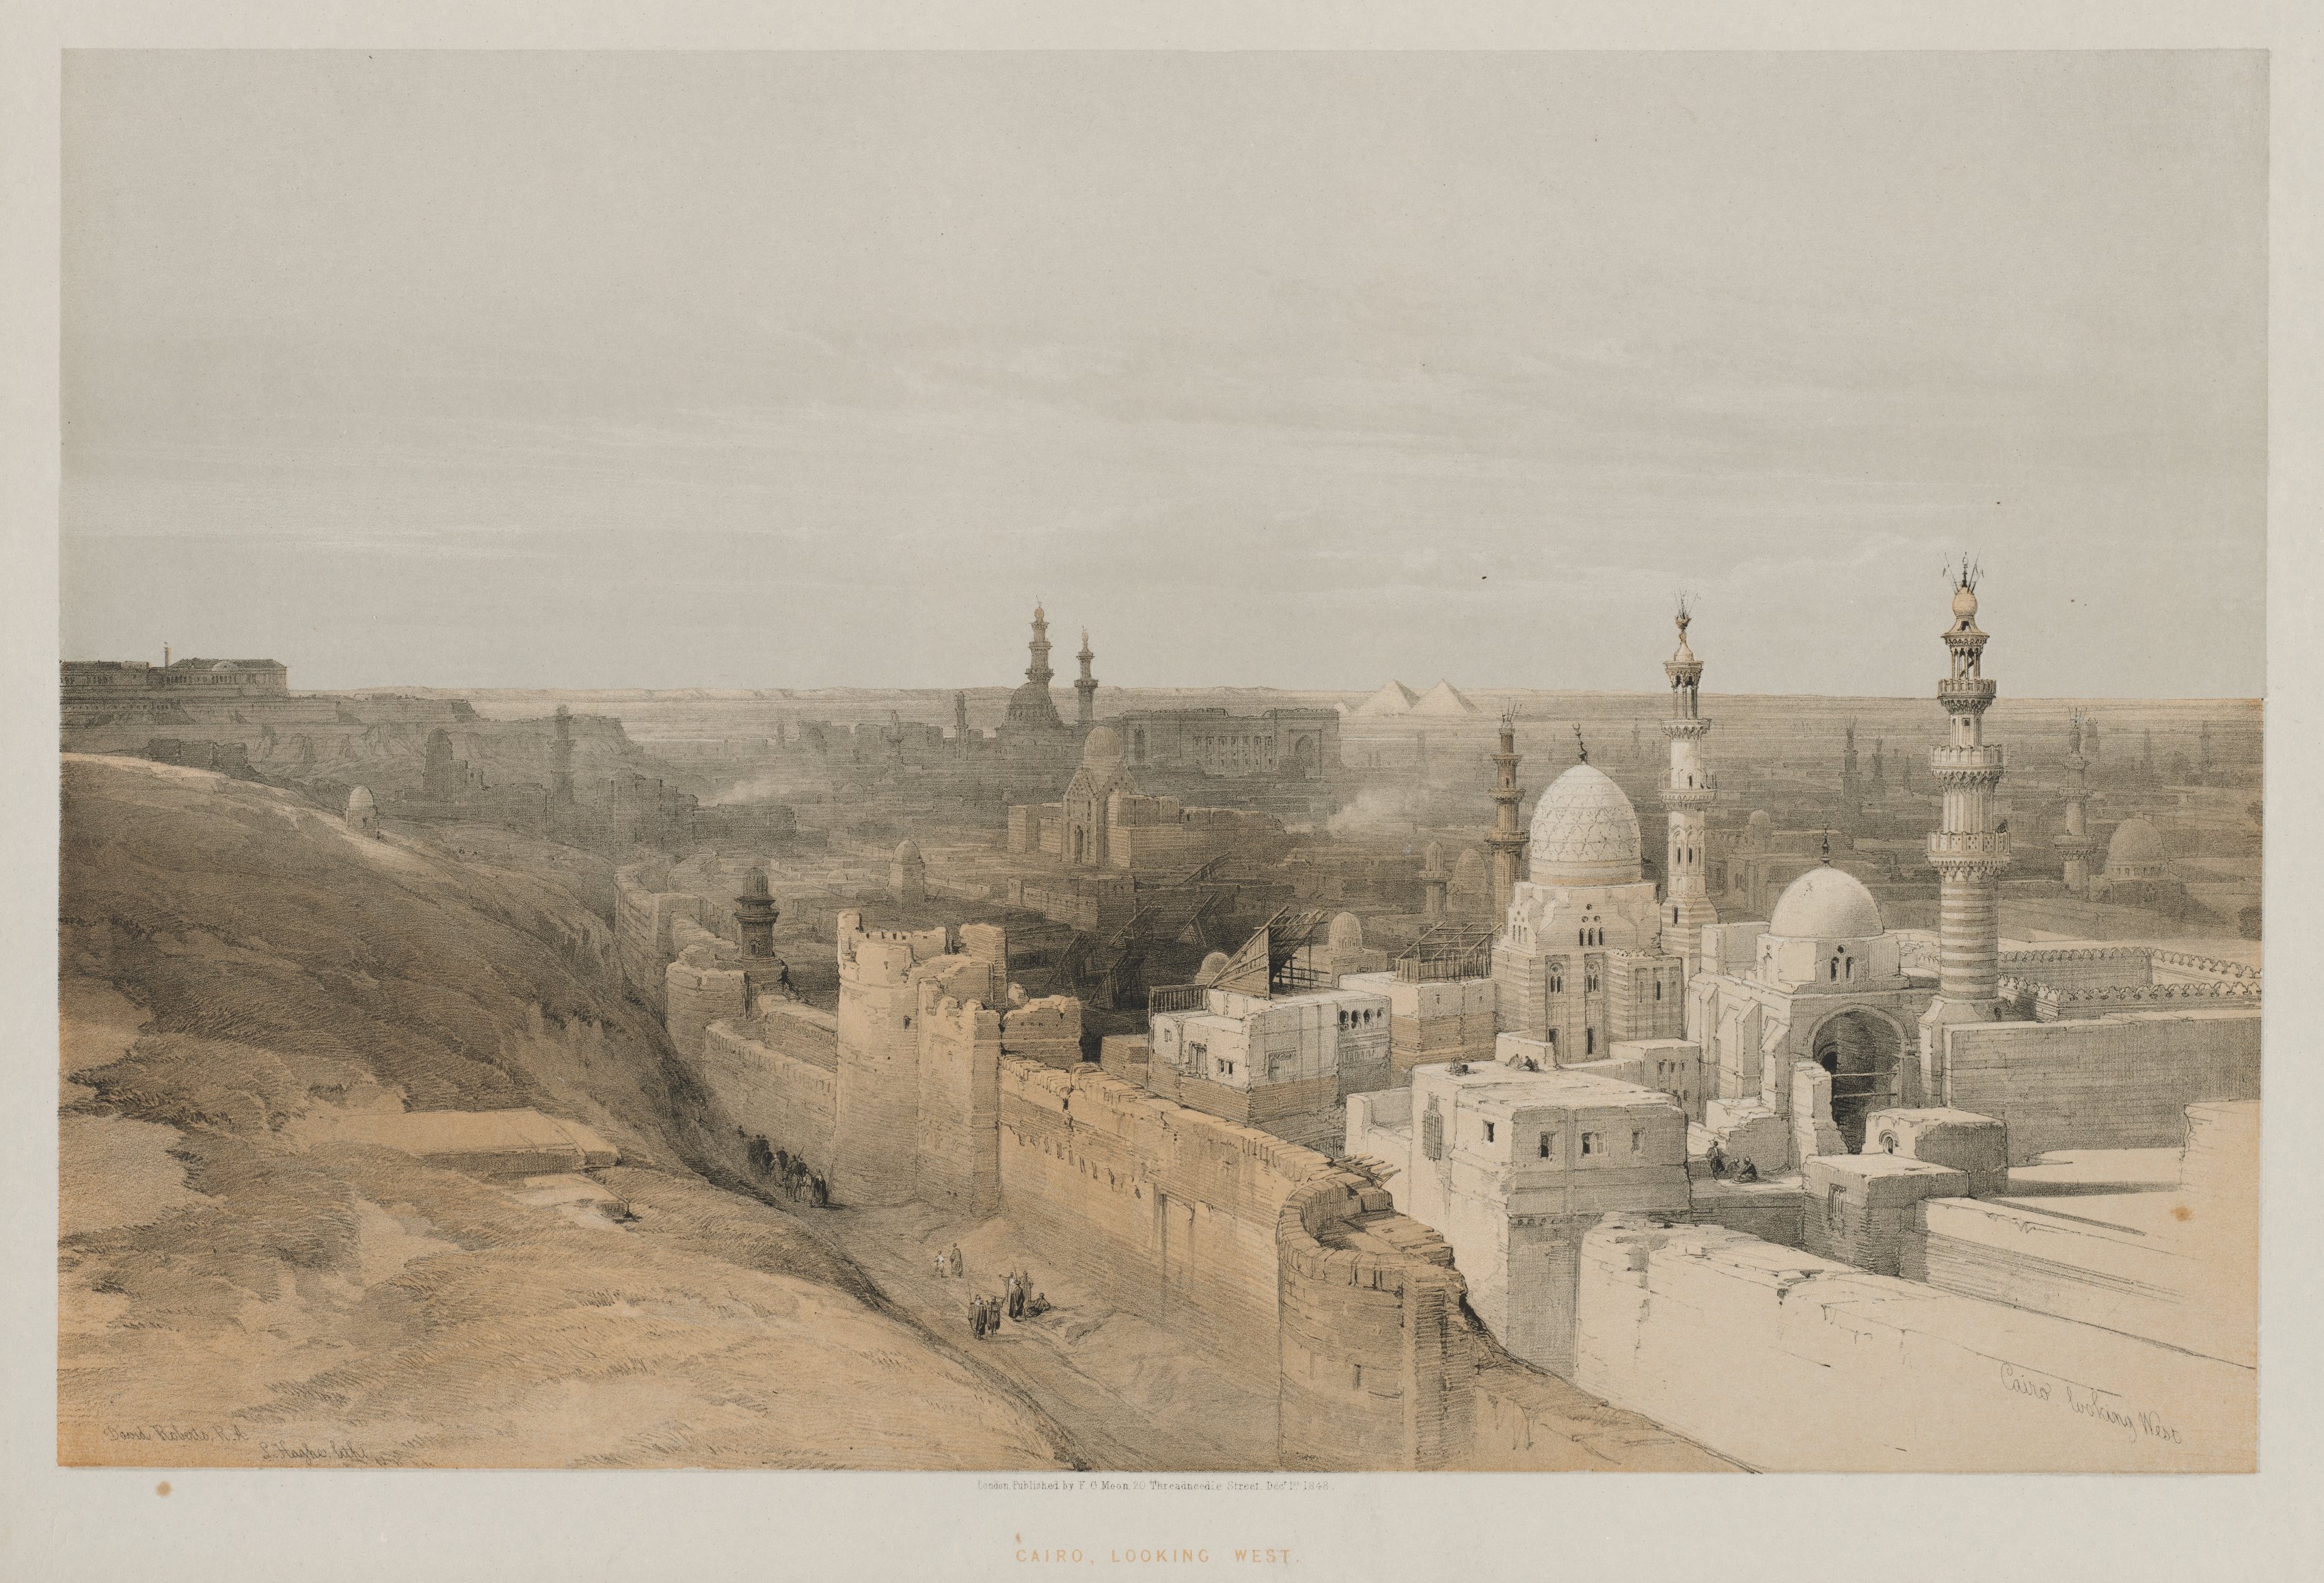 Egypt and Nubia, Volume III, No. 26, Cairo, Looking West